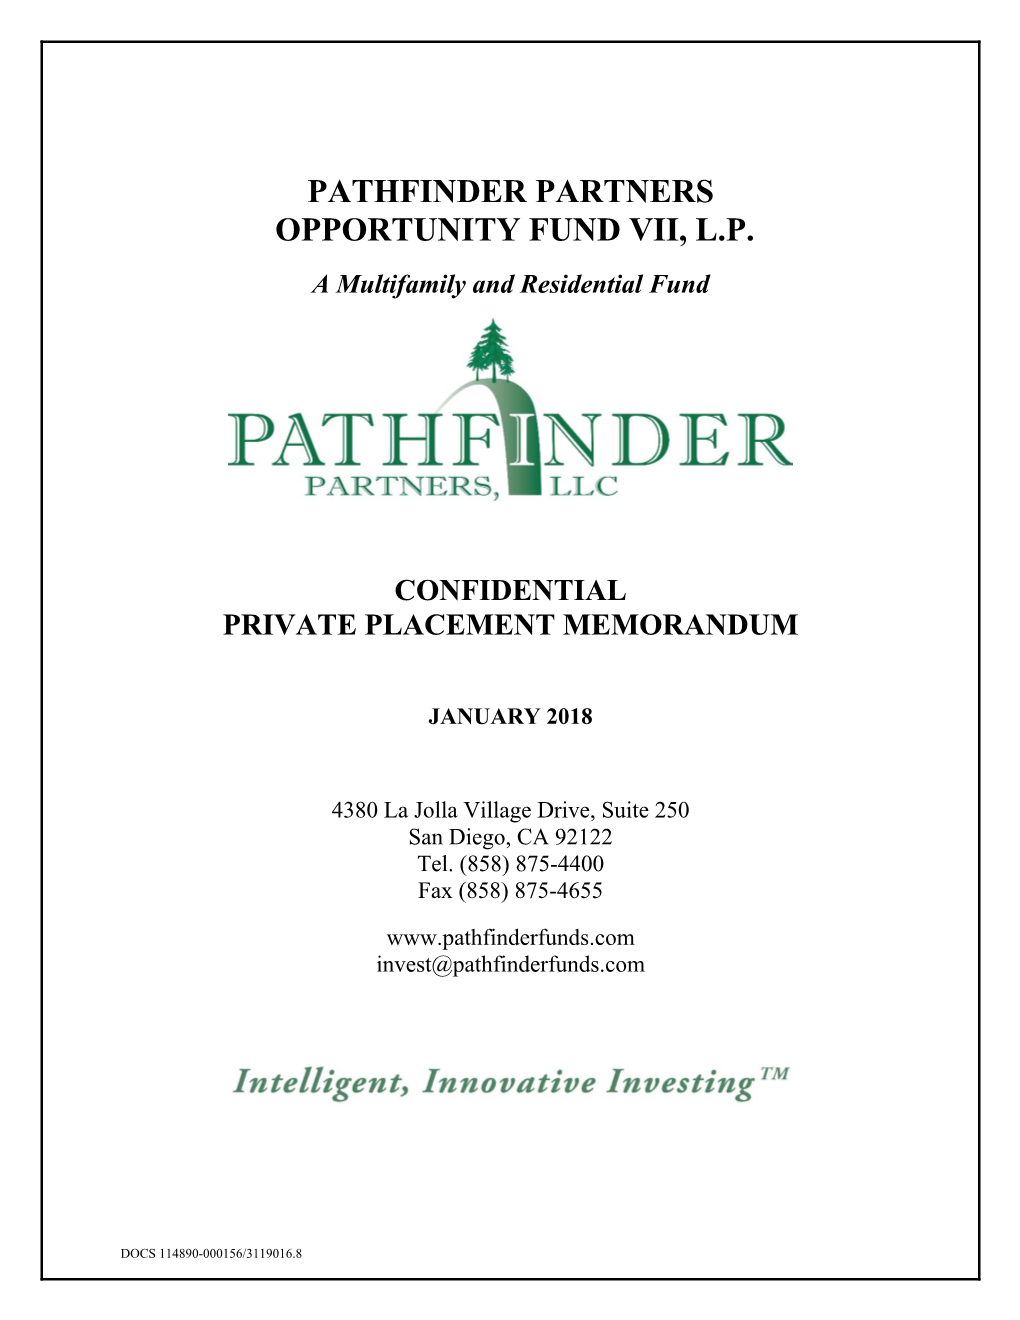 PATHFINDER PARTNERS OPPORTUNITY FUND VII, L.P. a Multifamily and Residential Fund